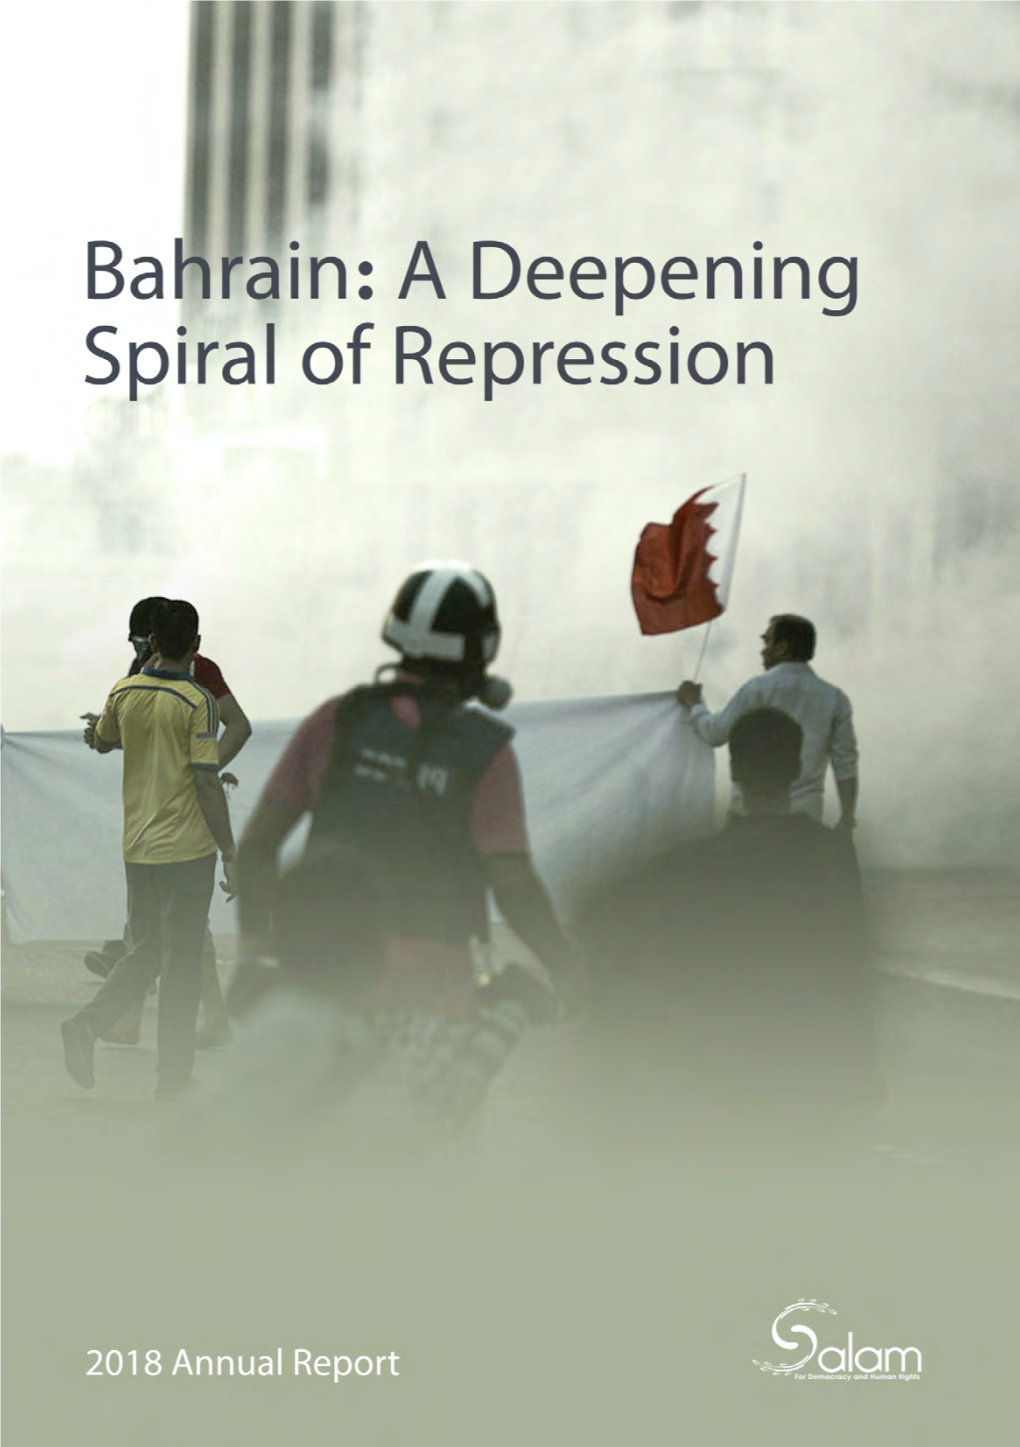 Bahrain: a Deepening Spiral of Repression